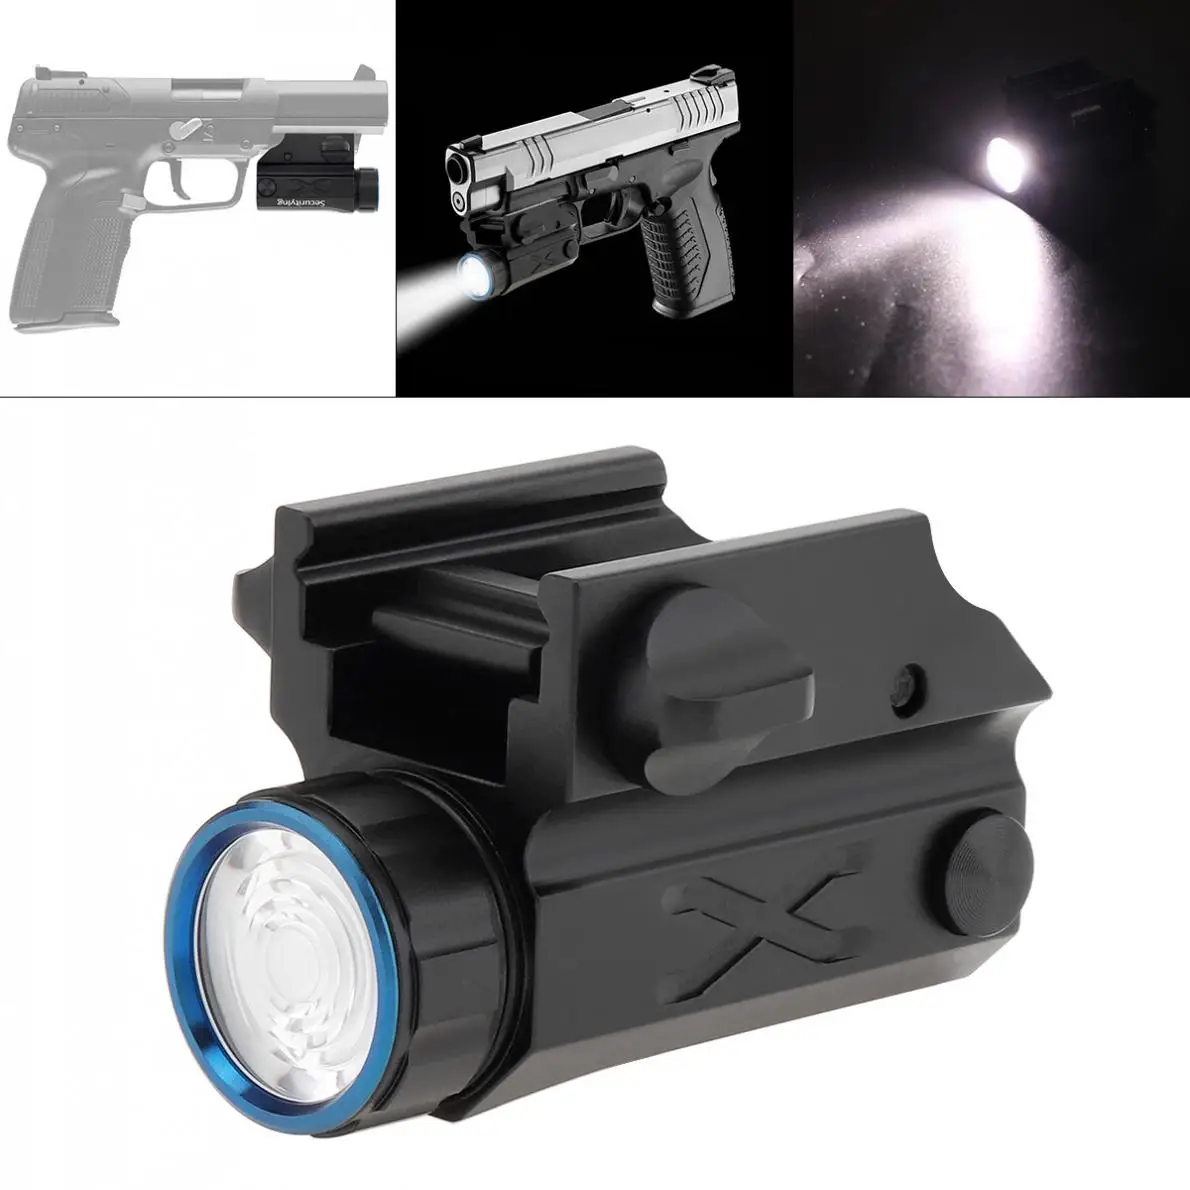 

SecurityIng 500 Lumens XP-L HI LED Tactical Mini Flashlight G03s Support CR123A Battery for Hunting/Hiking/Camping